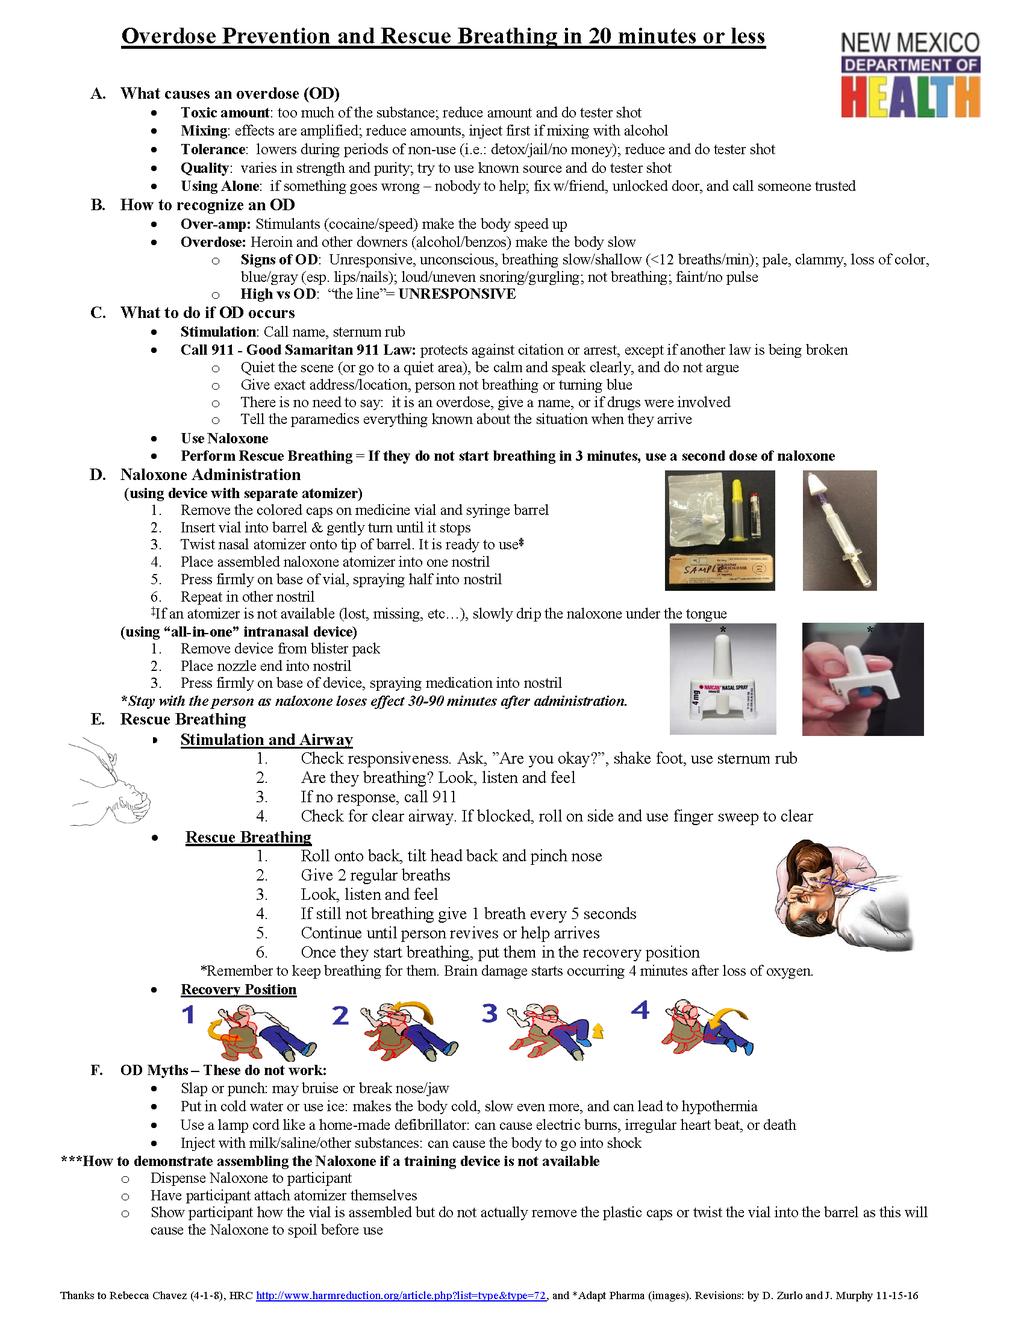 Appendix D: Approved Curriculum: Overdose Prevention and Rescue Breathing in 20 Minutes or Less This is a sample, please use the most recently updated forms